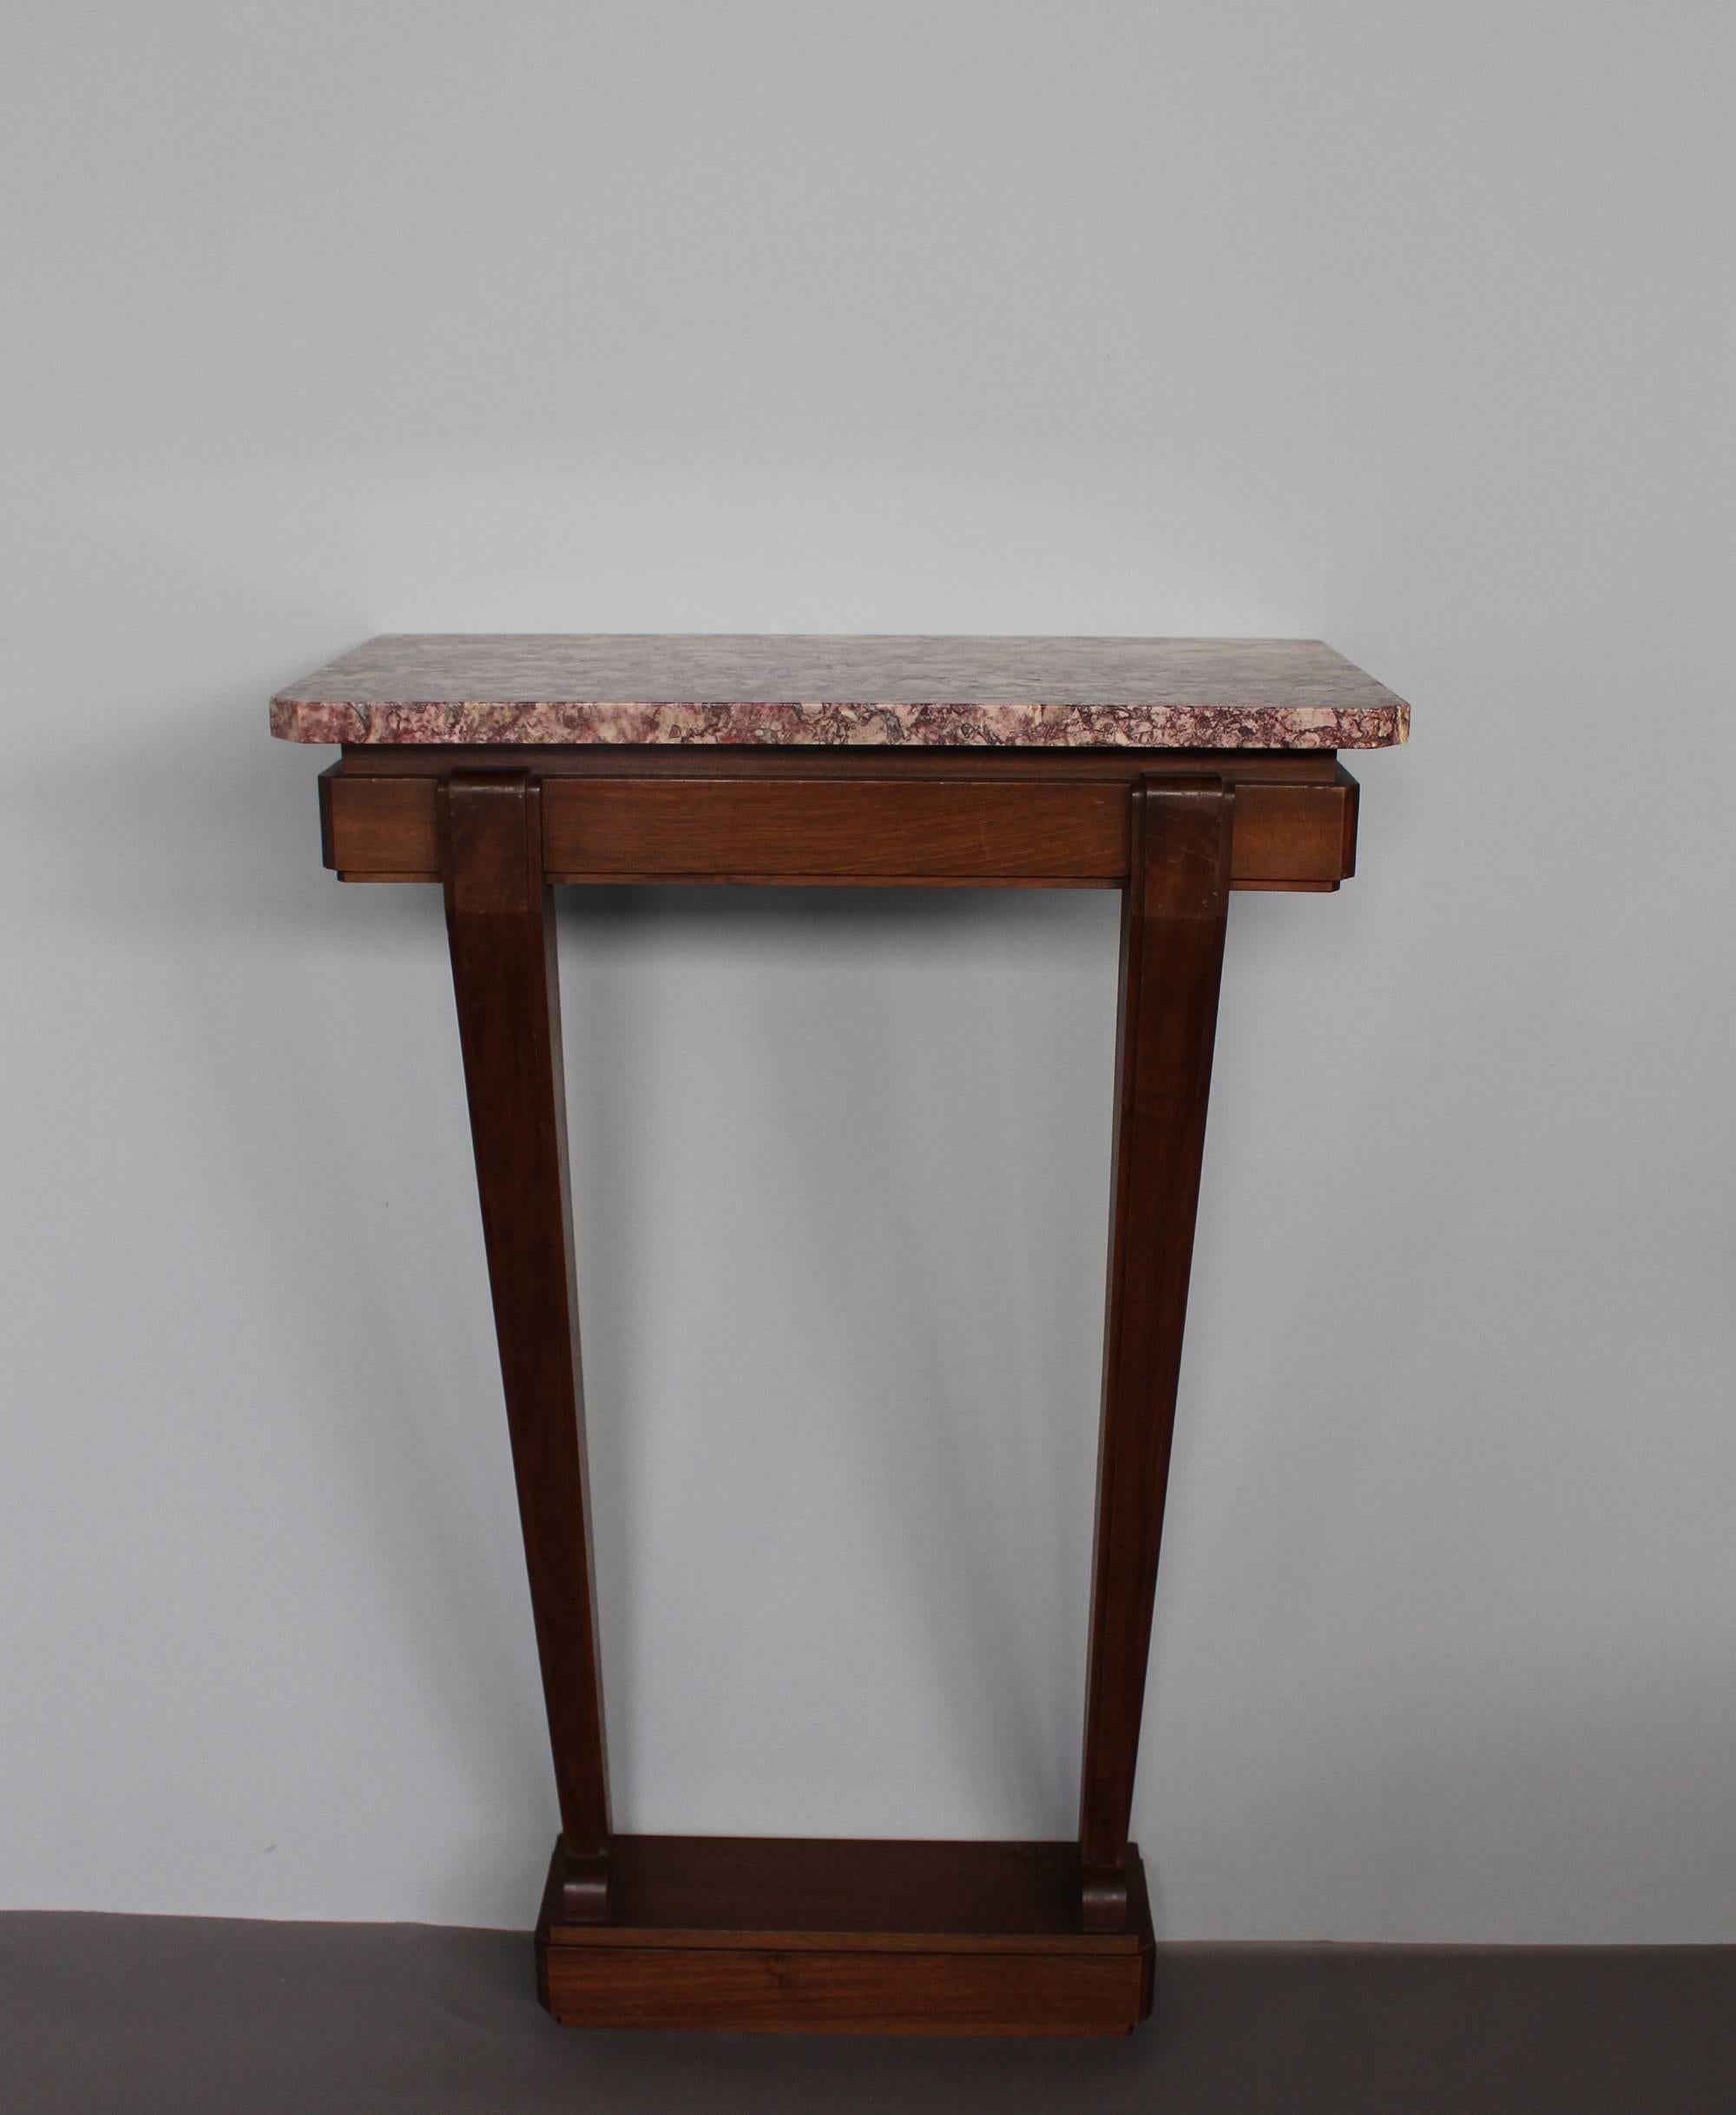 A fine French Art Deco console with a mahogany pedestal and a marble top.
